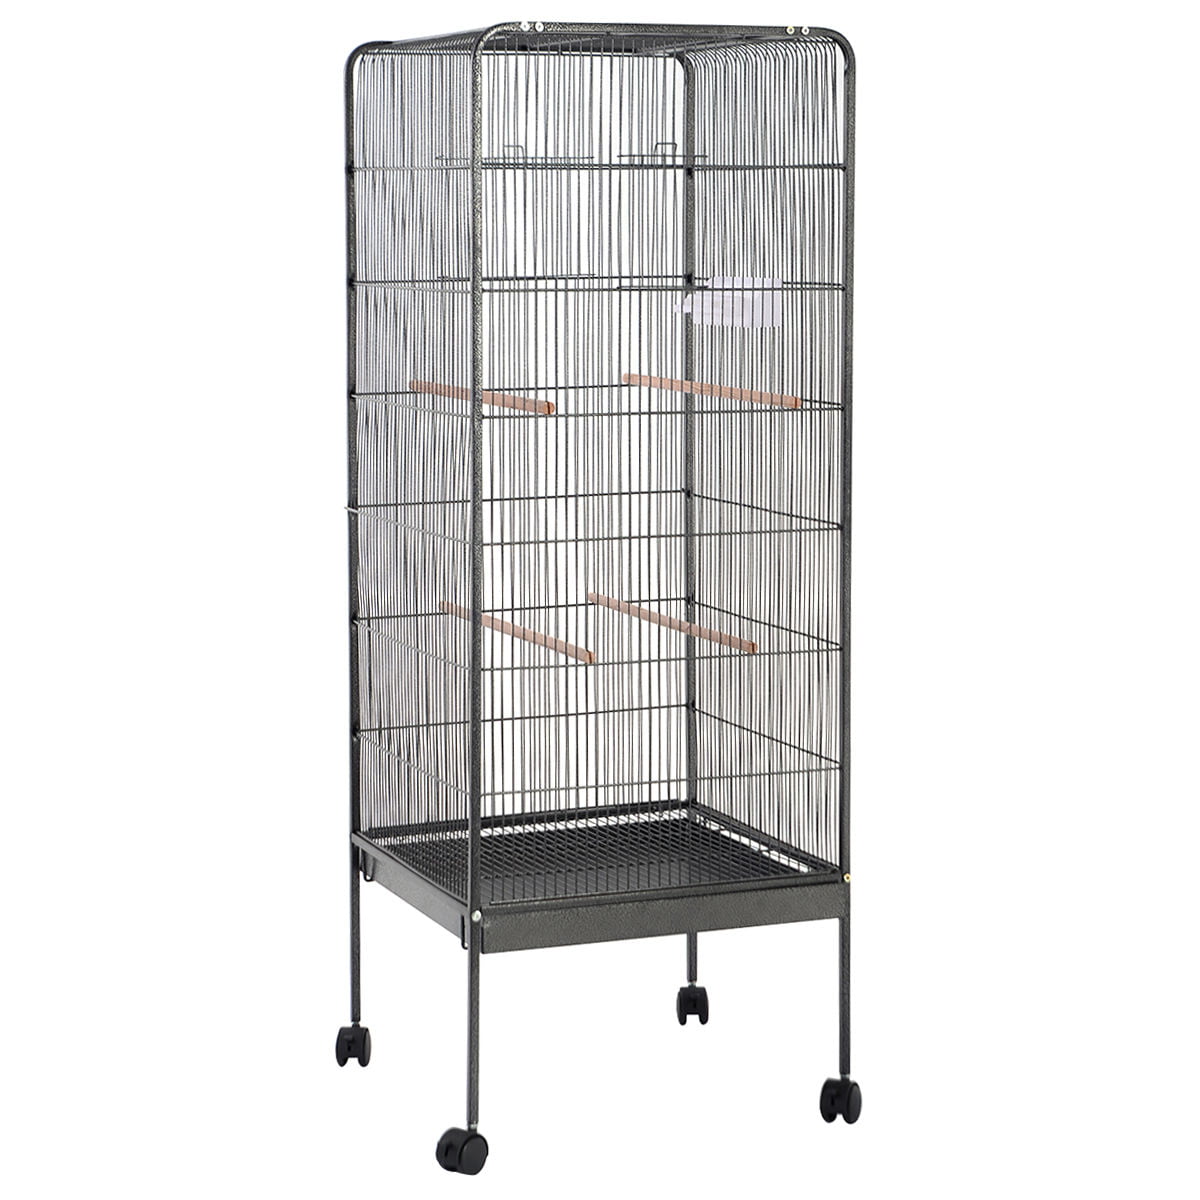 58" Large Play Top Parrot Bird Cage Pet Supplies w/Perch Stand Two Doors Flattop 